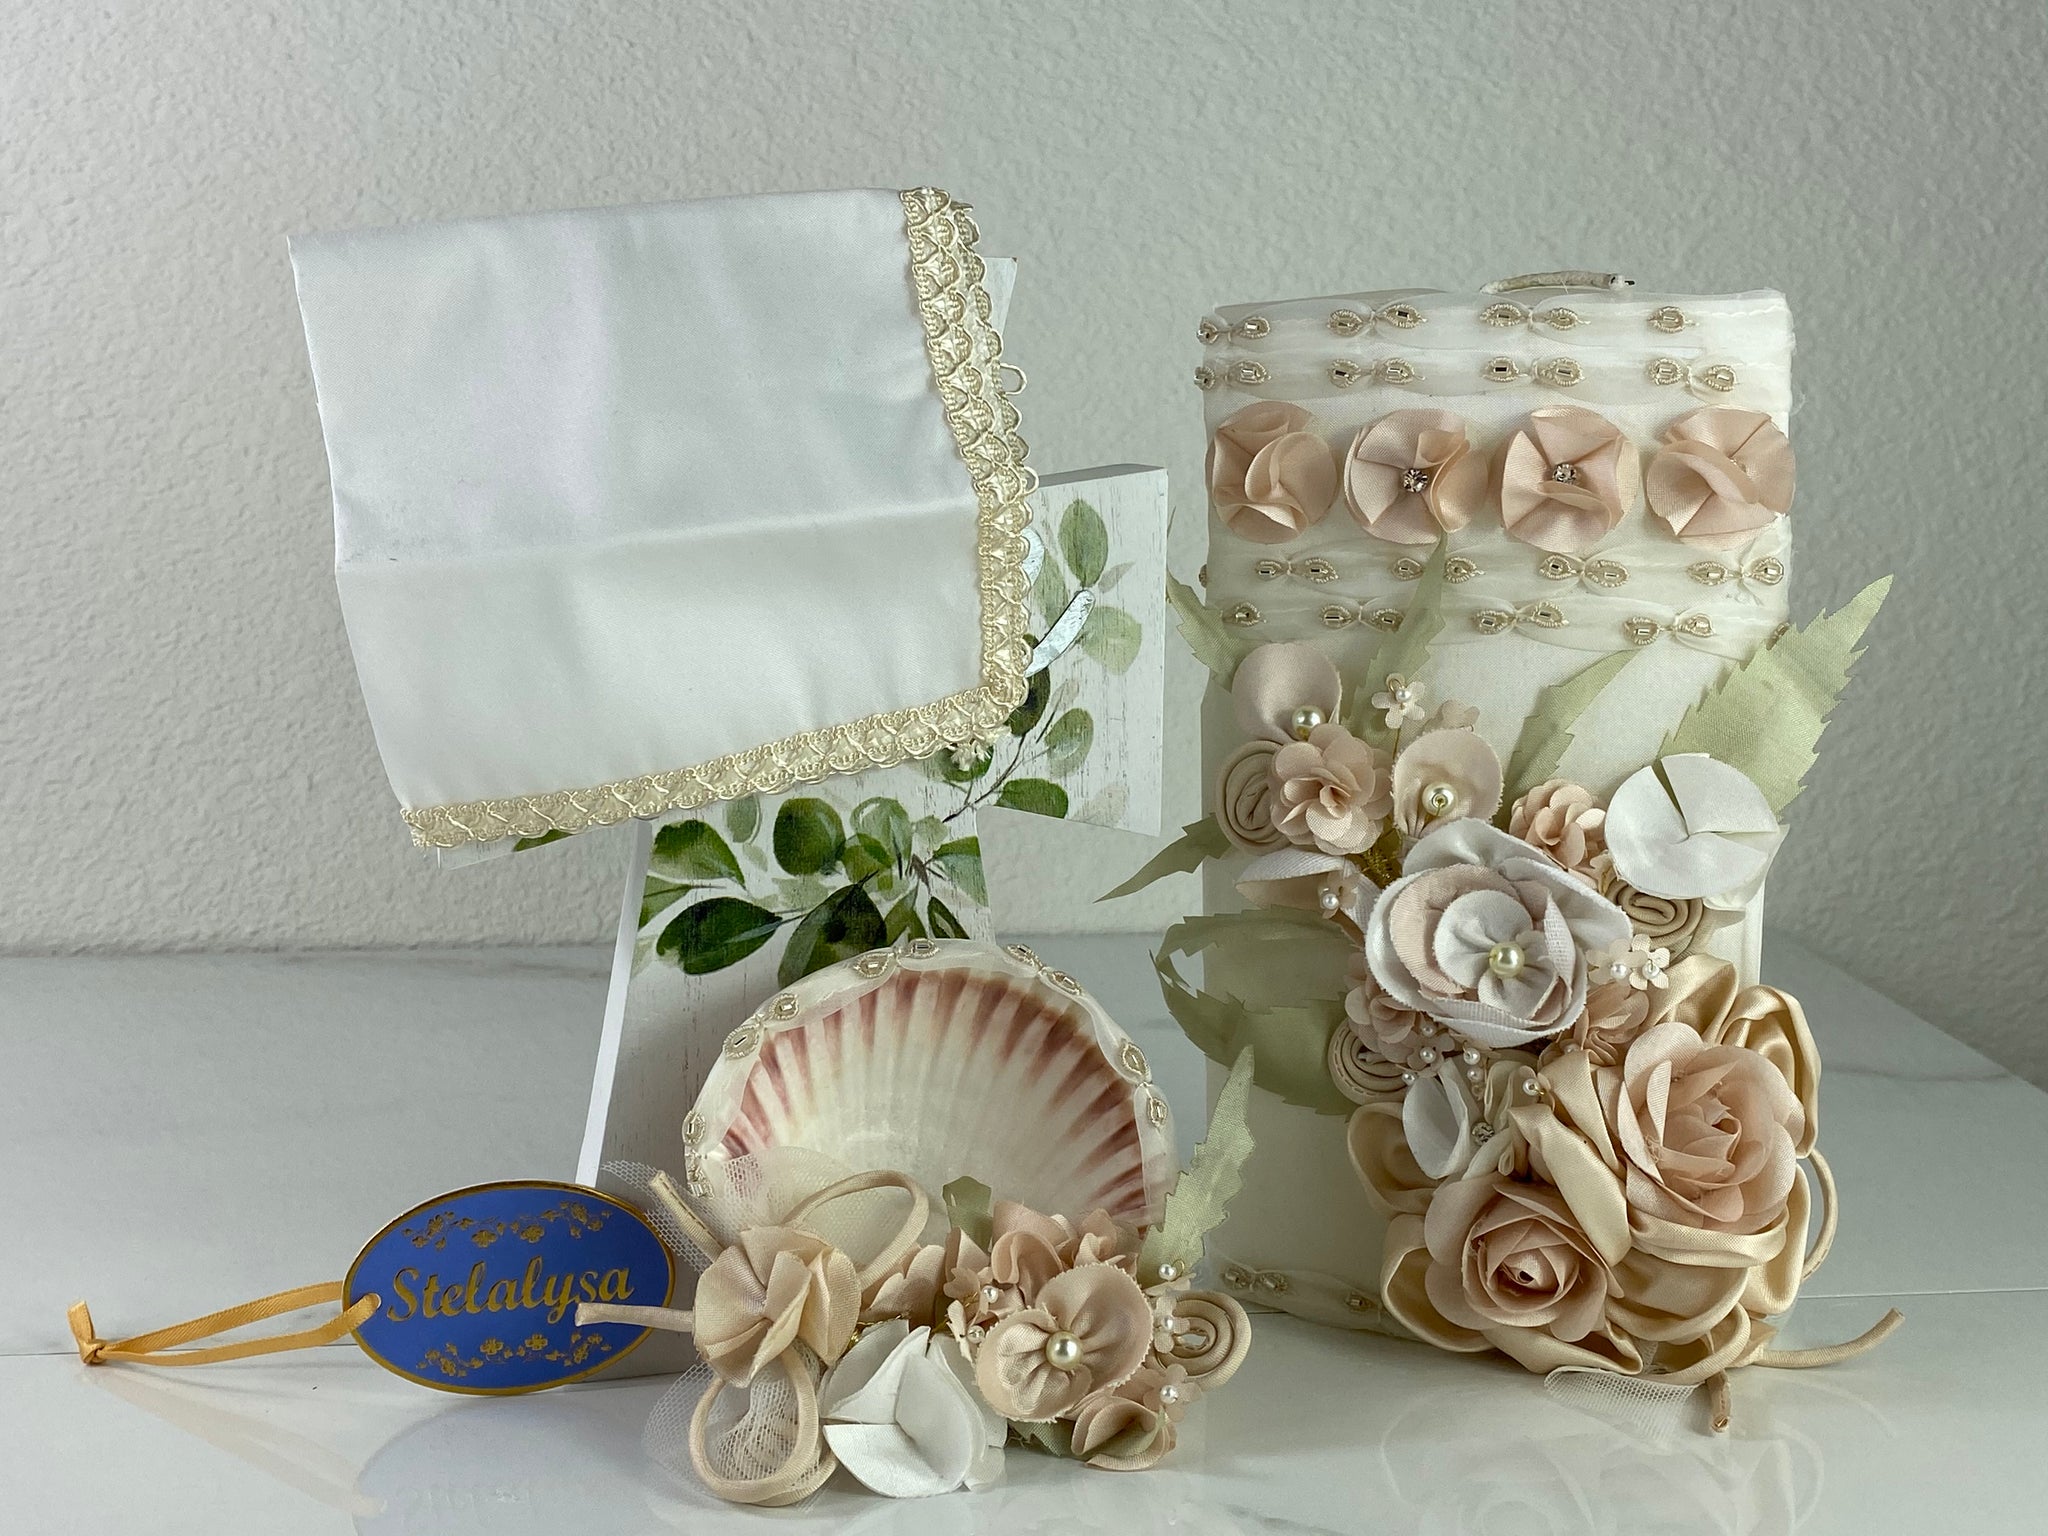 These one-of-a-kind Candle set is handmade and ivory in color.  This candle can also be use with a white baptism outfit because it has an array of light colors including white.   It is uniquely decorated with ribbon, pearls, crystals, flowers, and beads making it a gorgeous keepsake.   This candle is oval in shape.    To match, the Shell is put together piece by piece to compliment the Candle and Handkerchief.  